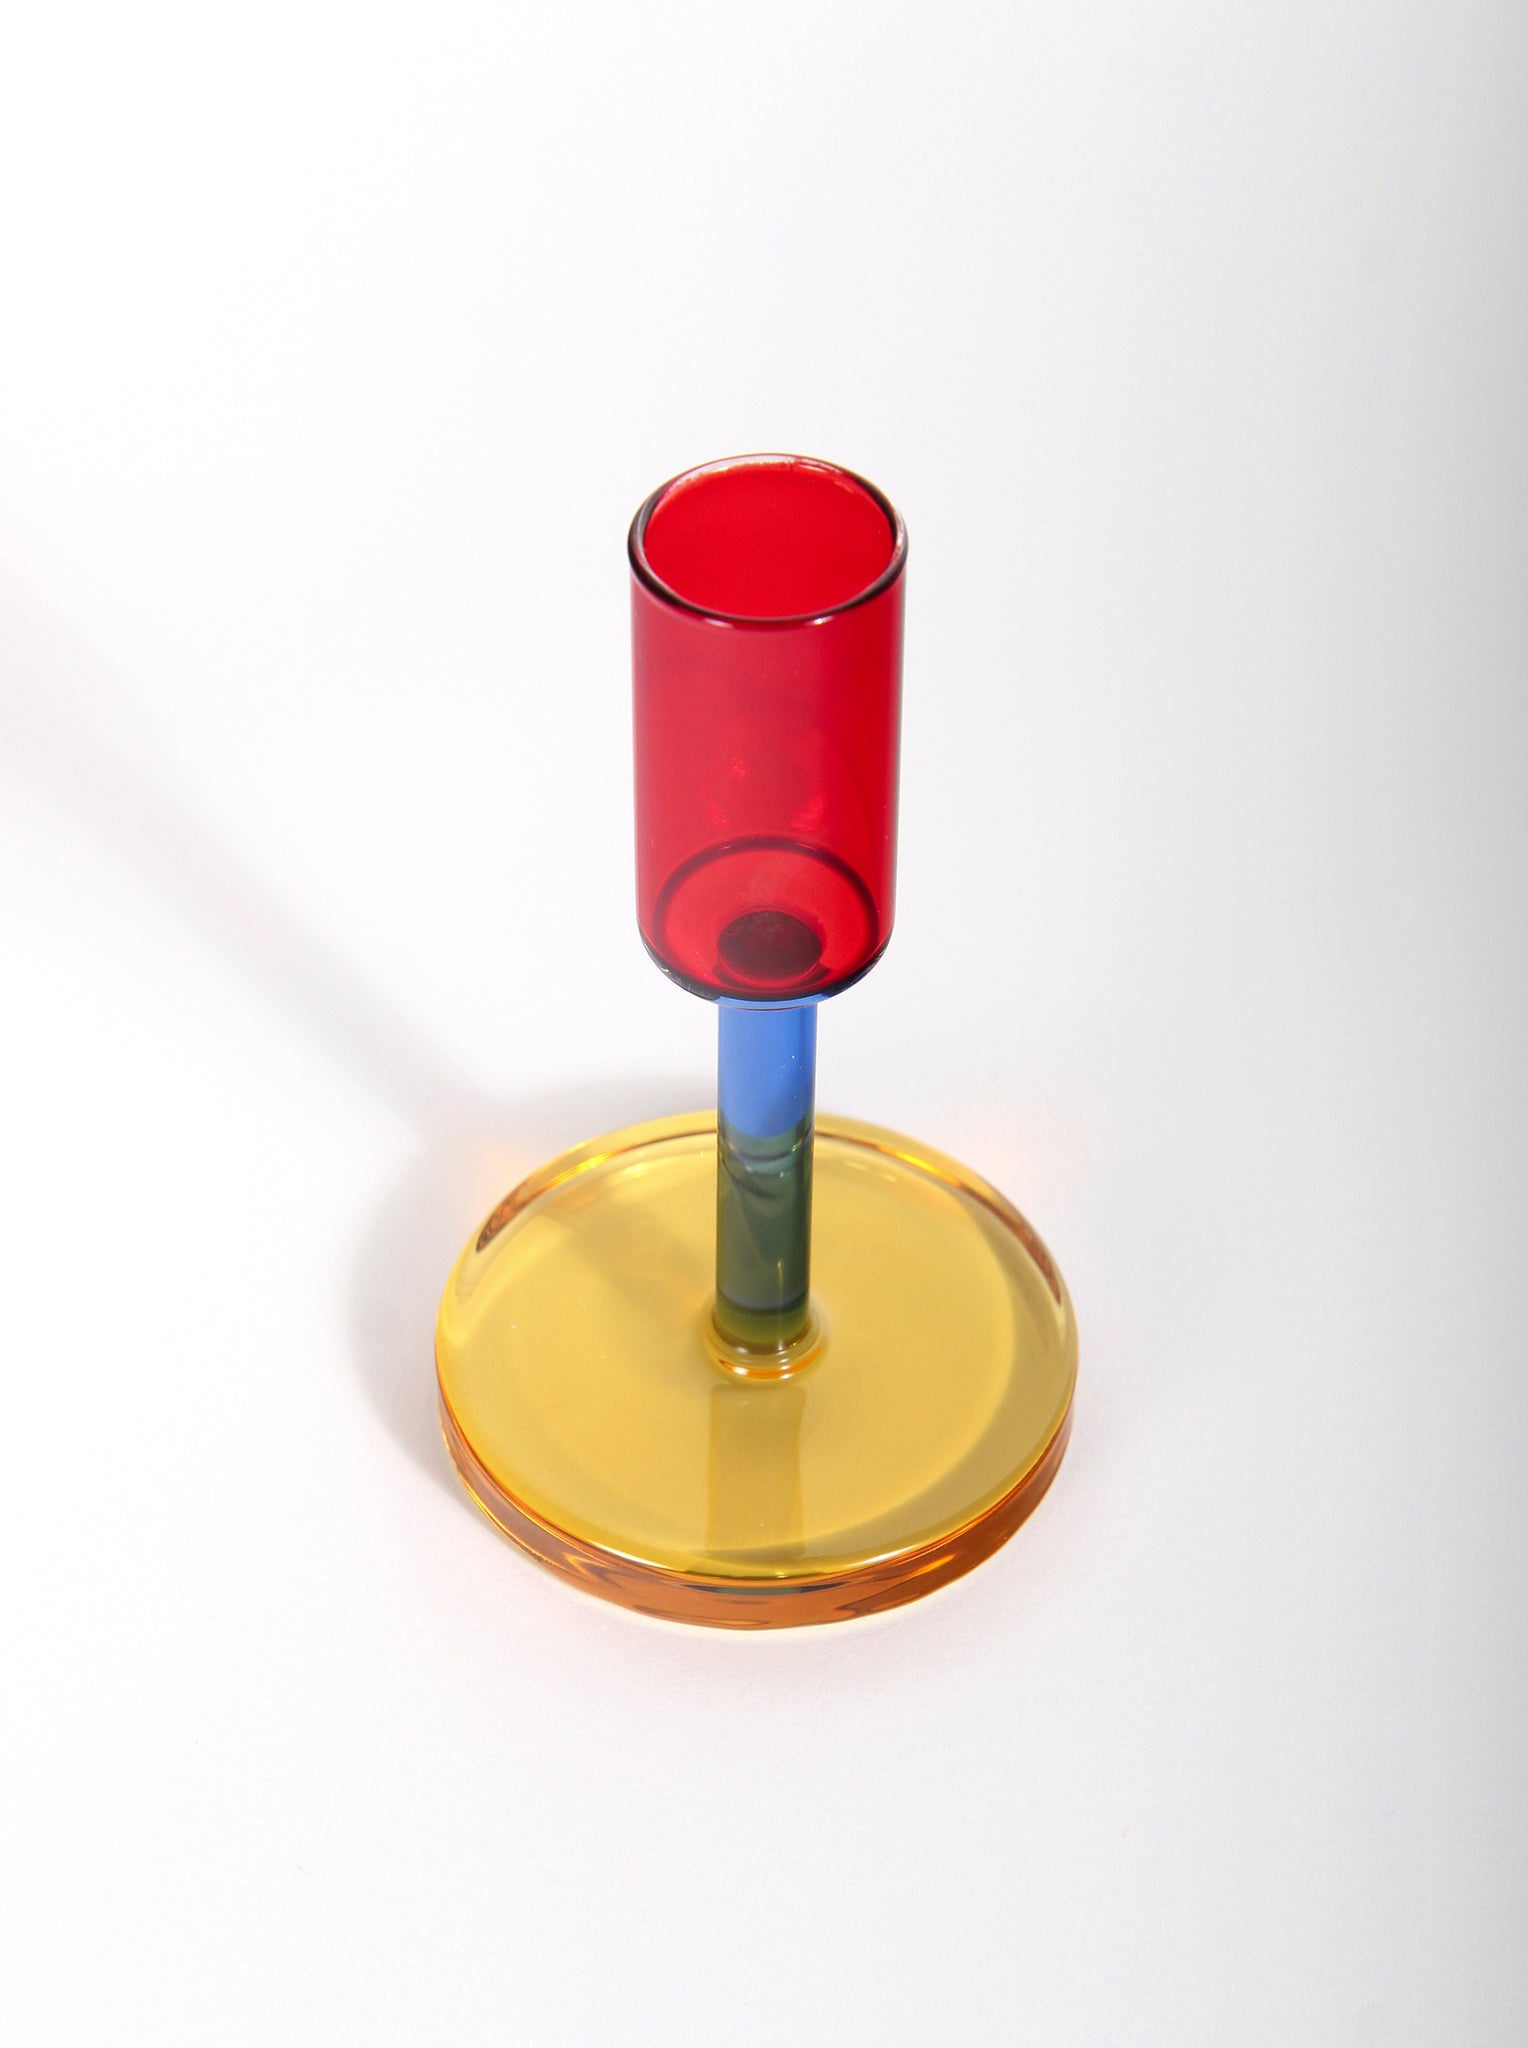 Glass Candlestick Holder in Red, Blue, and Yellow